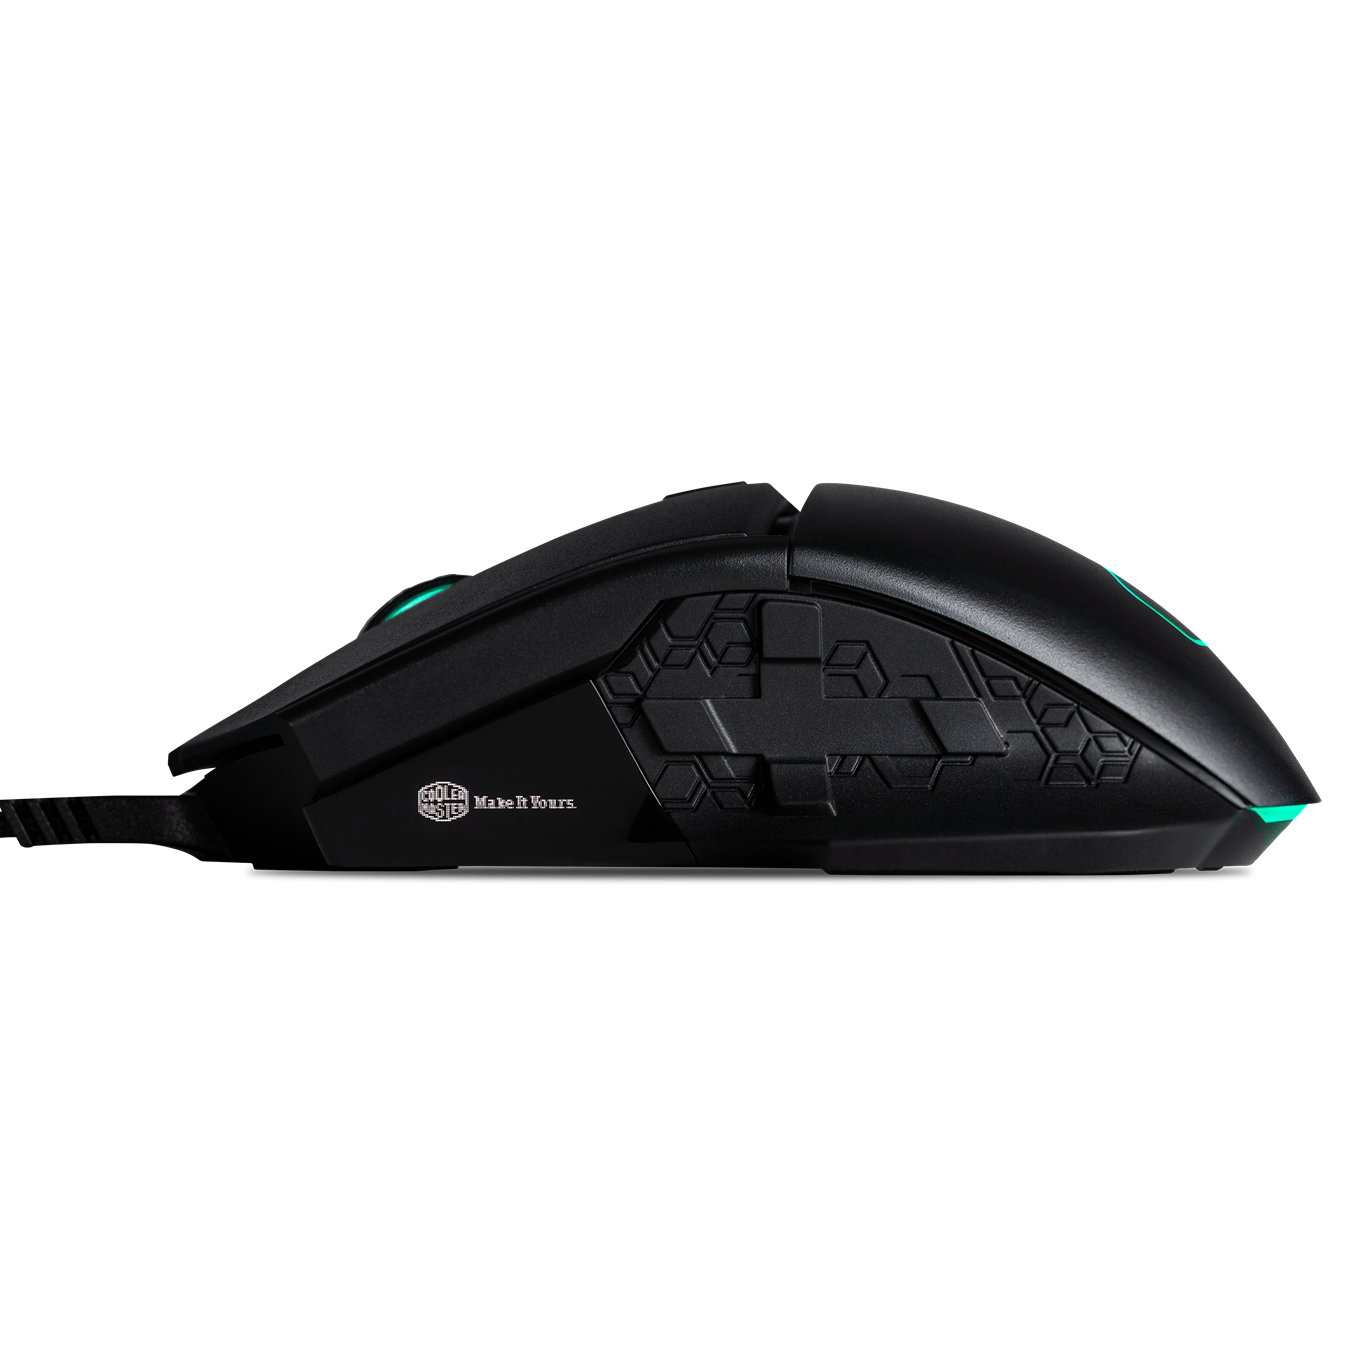 MM830 Gaming Mouse - PBT chassis minimizes wear and tear due to sweat, sun, and Cheeto dust. Omron switches and Japanese ALPS scroll encoder for nice snappy weapon switches.